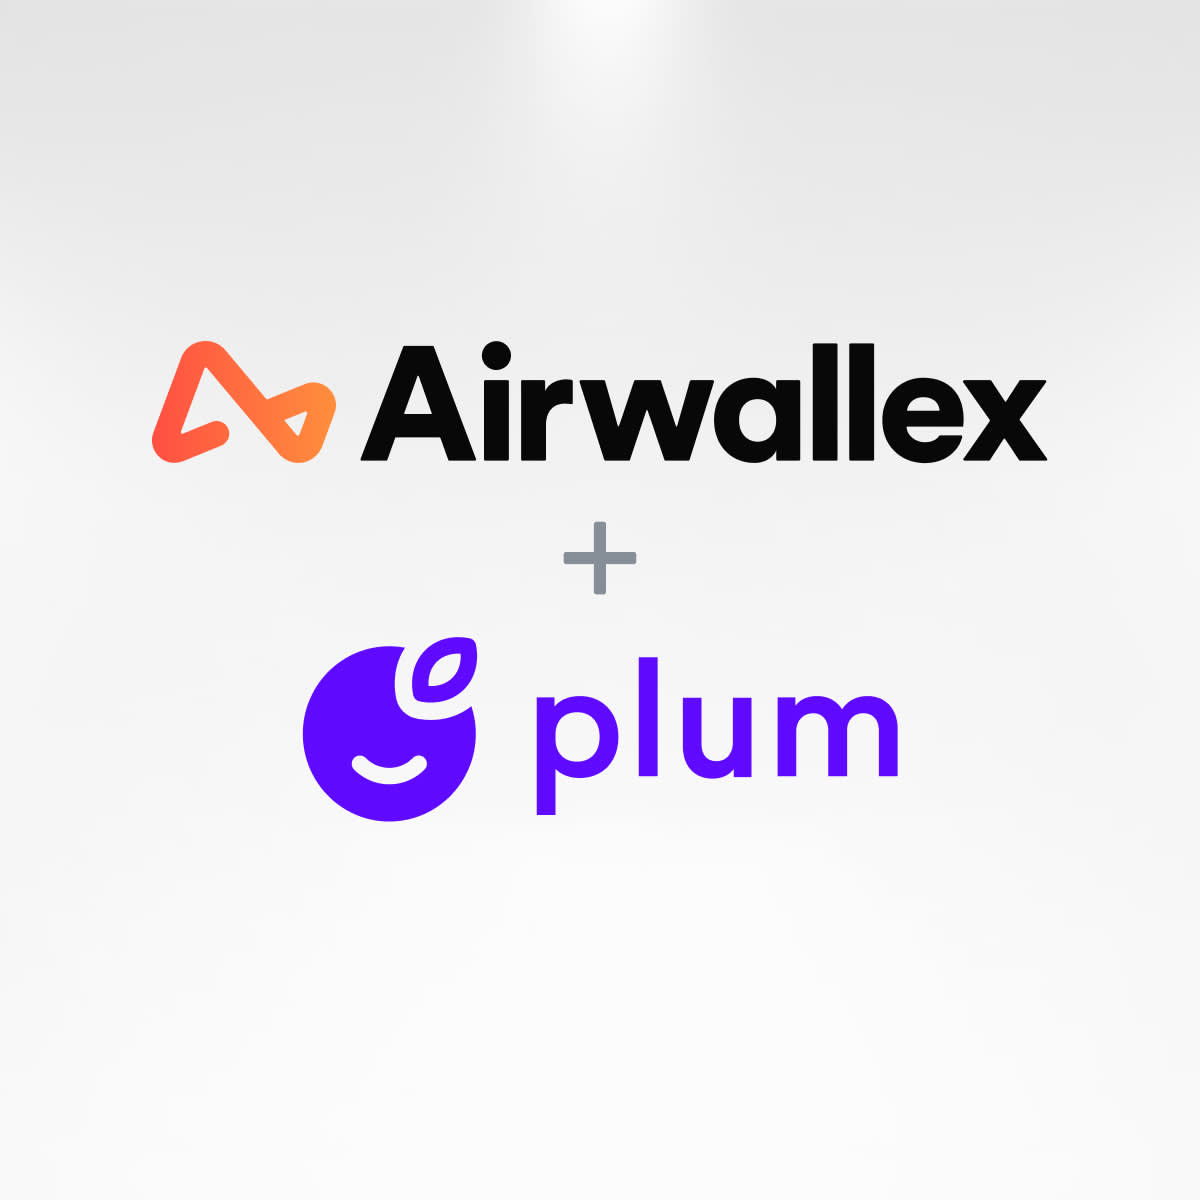 Airwallex partners with Plum to power its stock investing feature